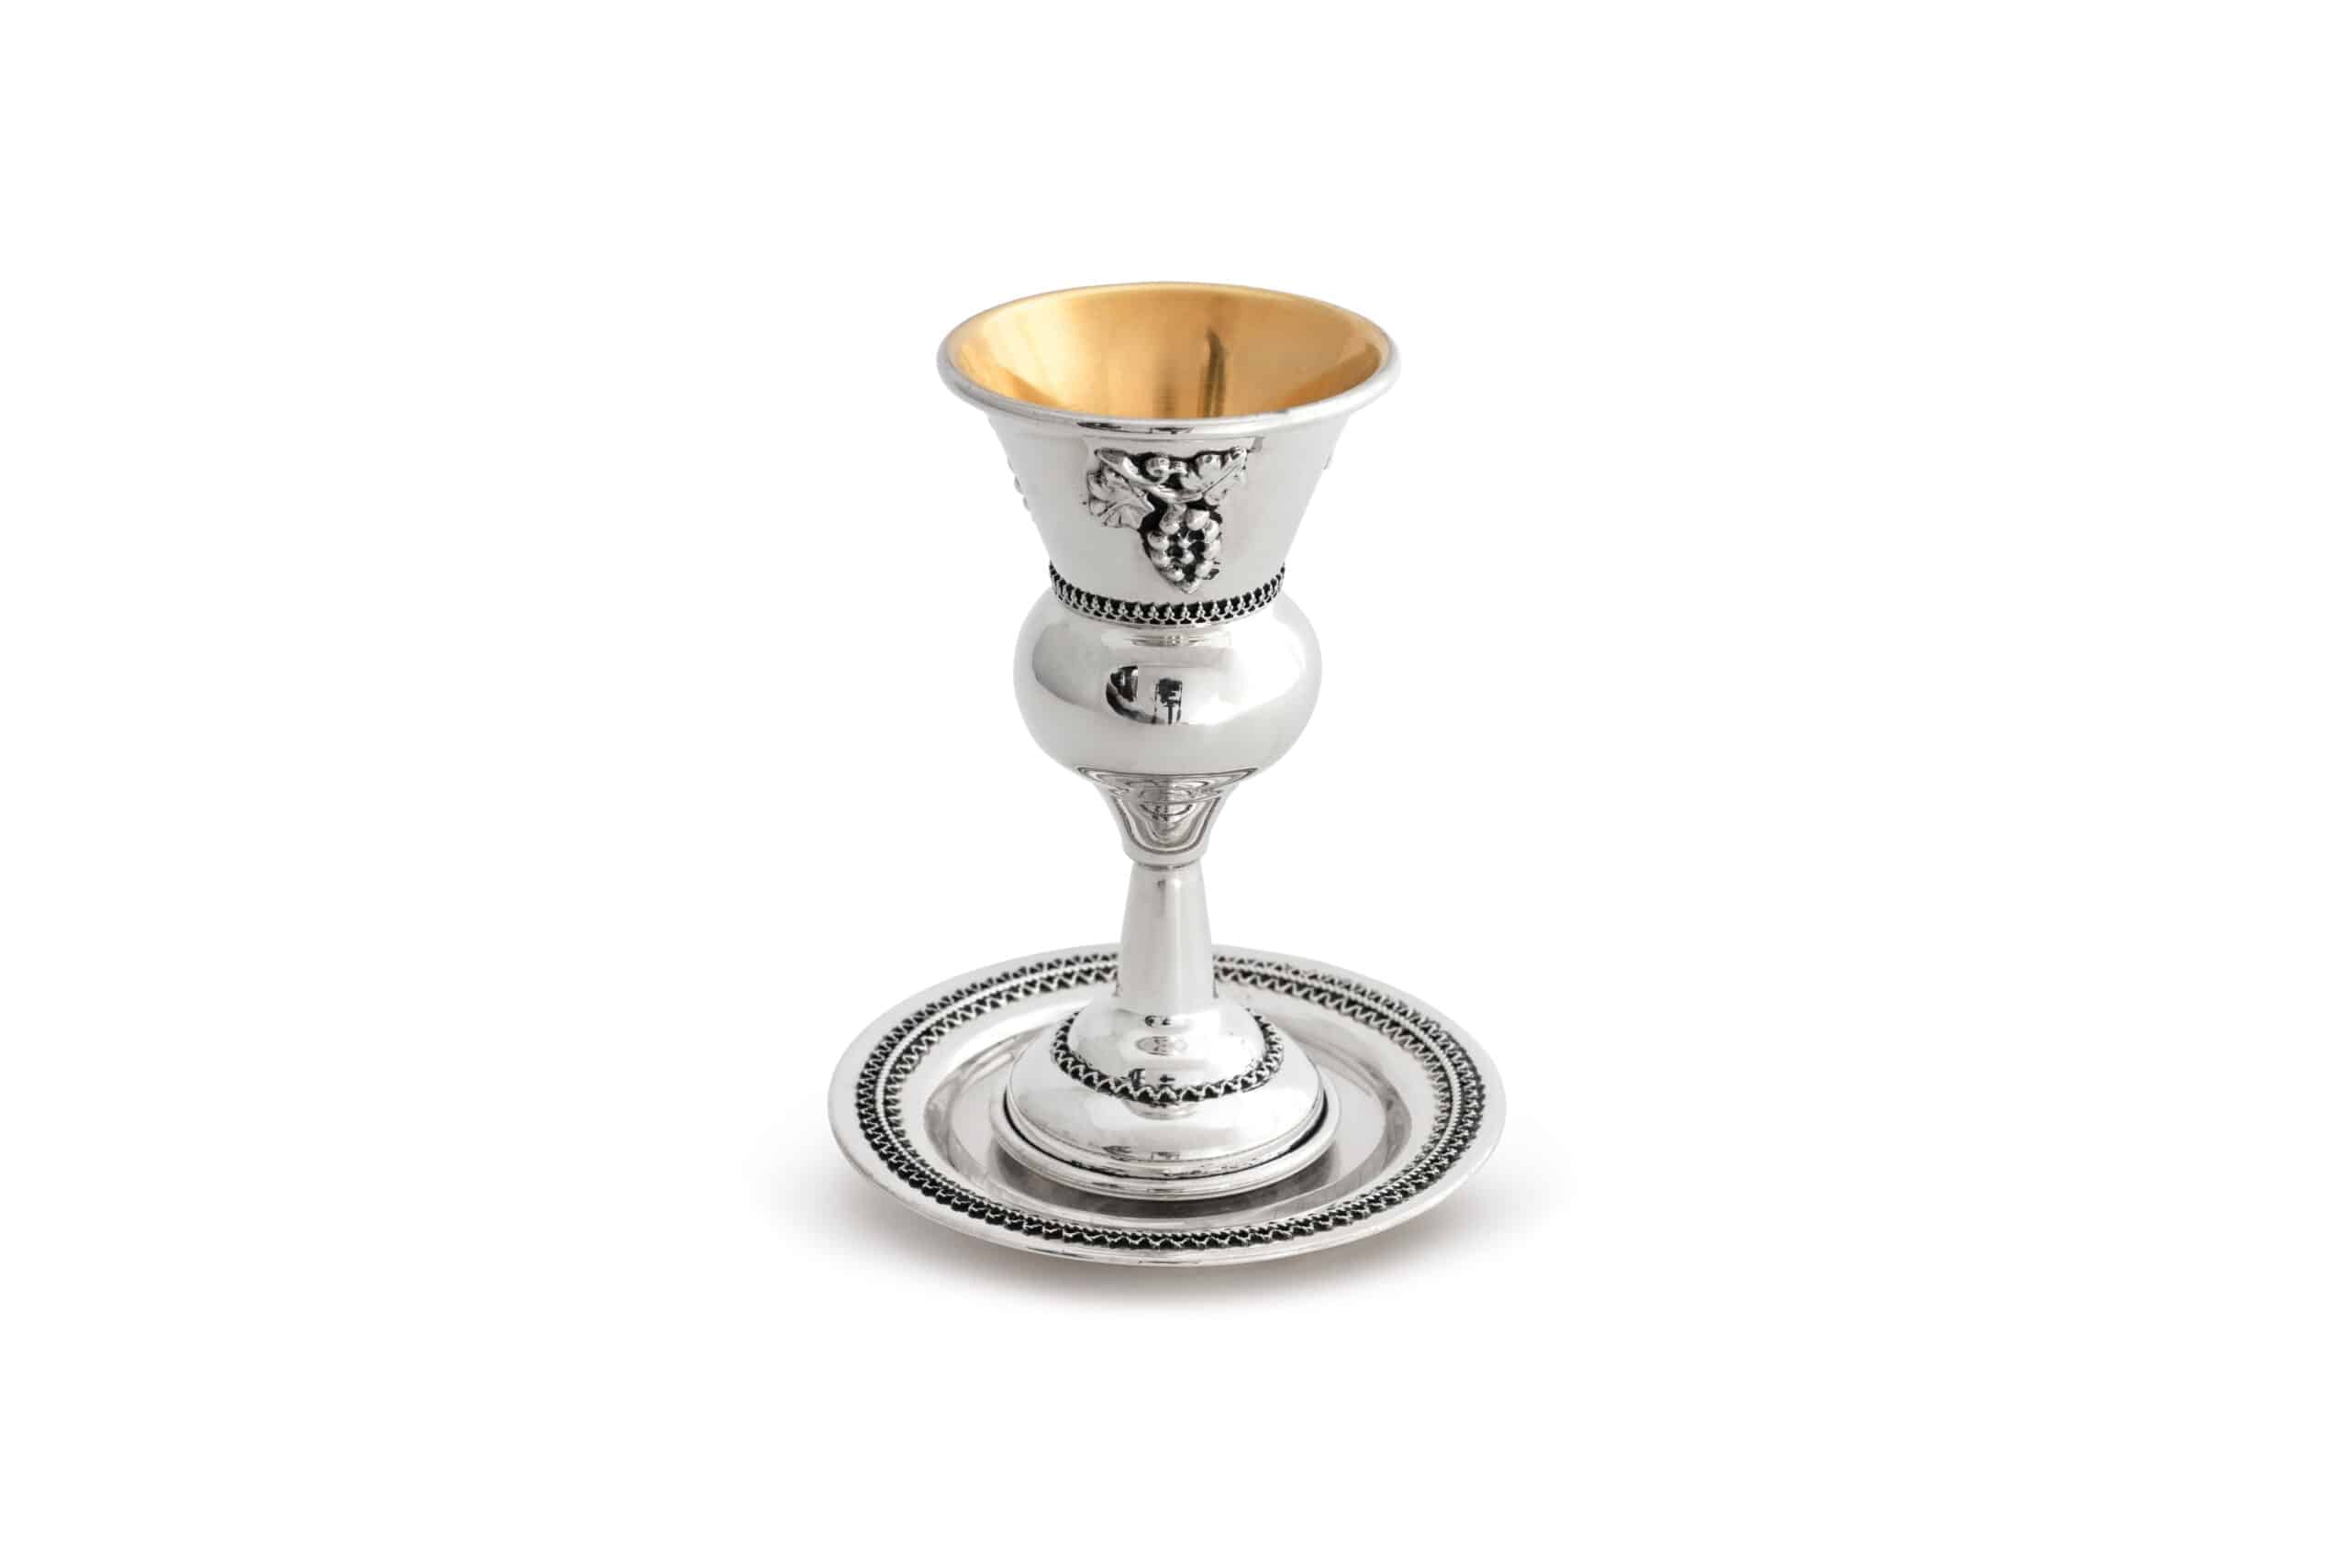 Custom Sterling Silver Small Kiddush Cup With Grape Decoration